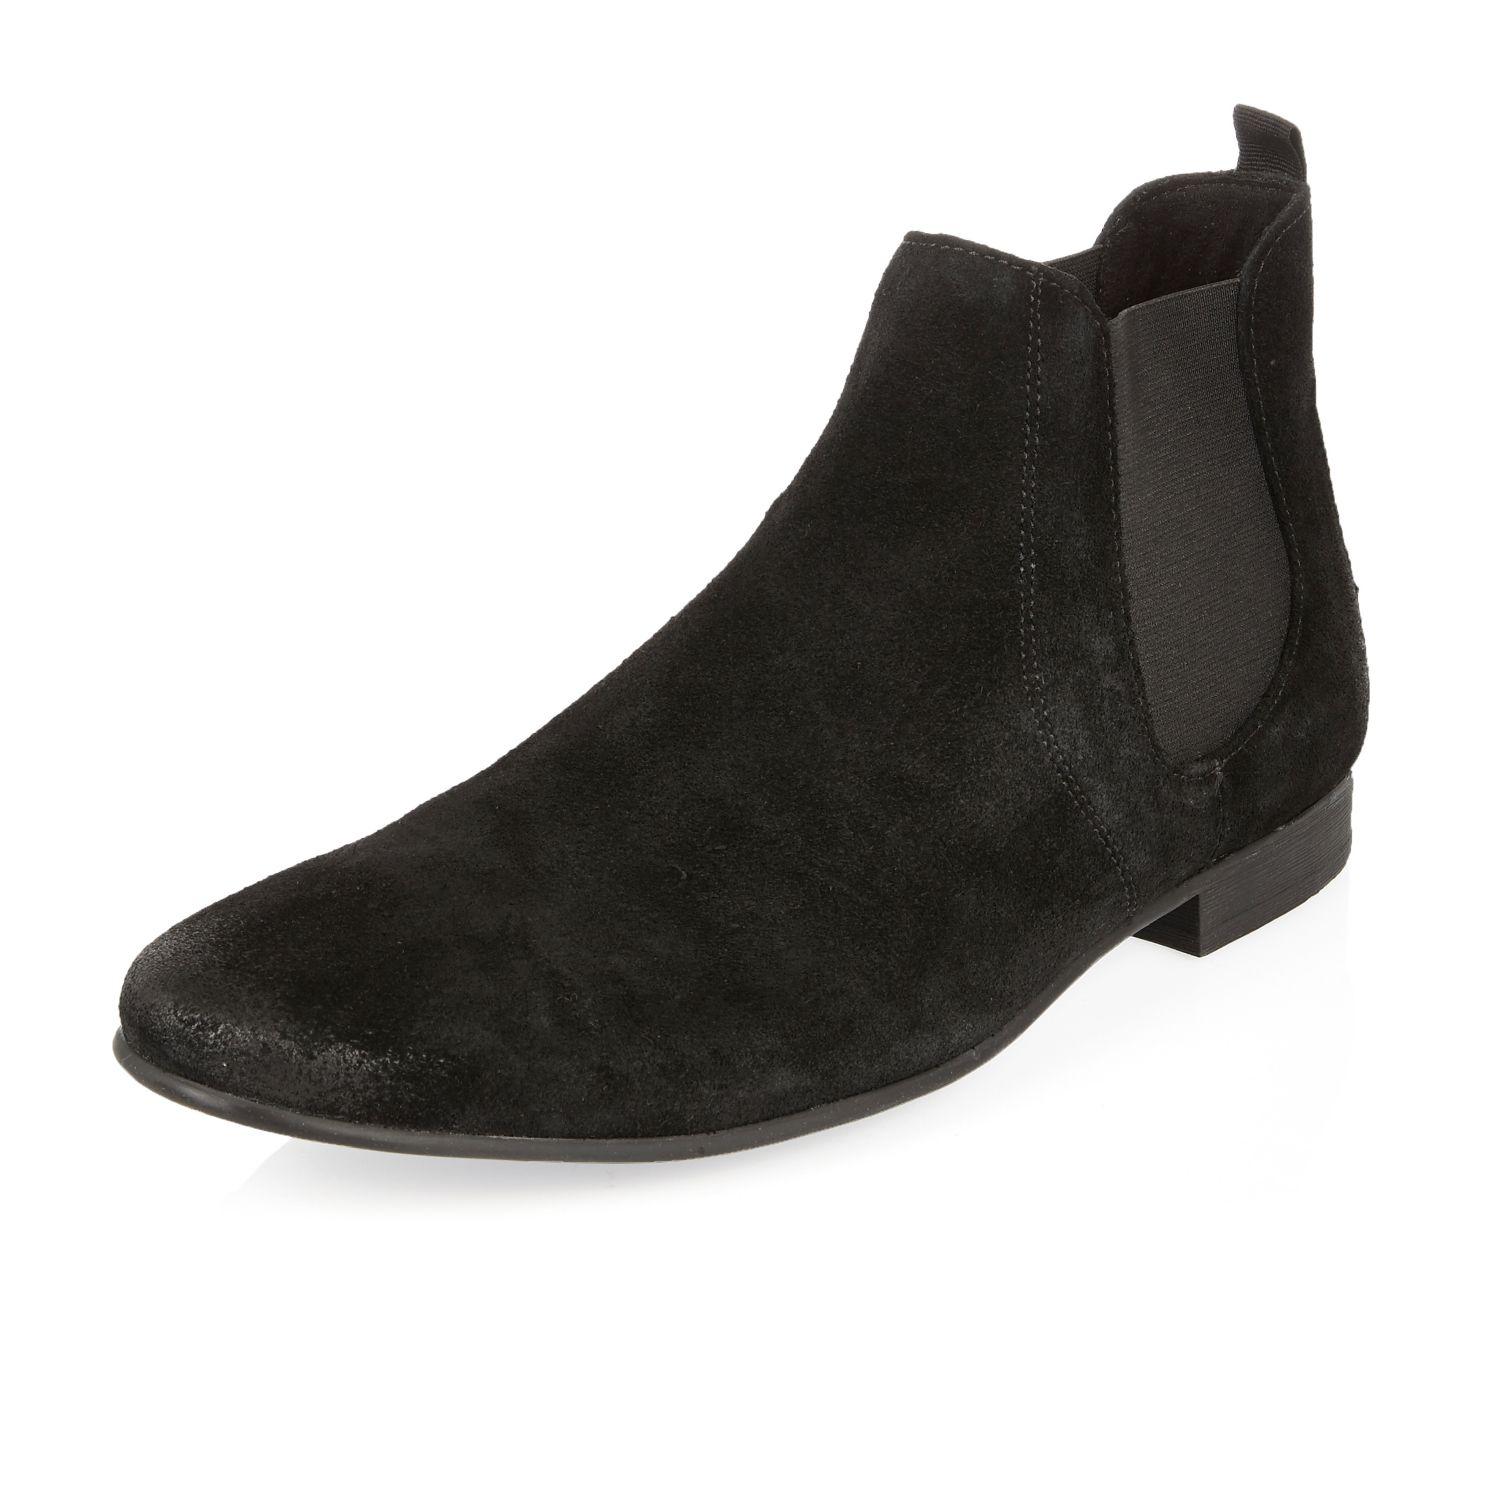 river island suede chelsea boots